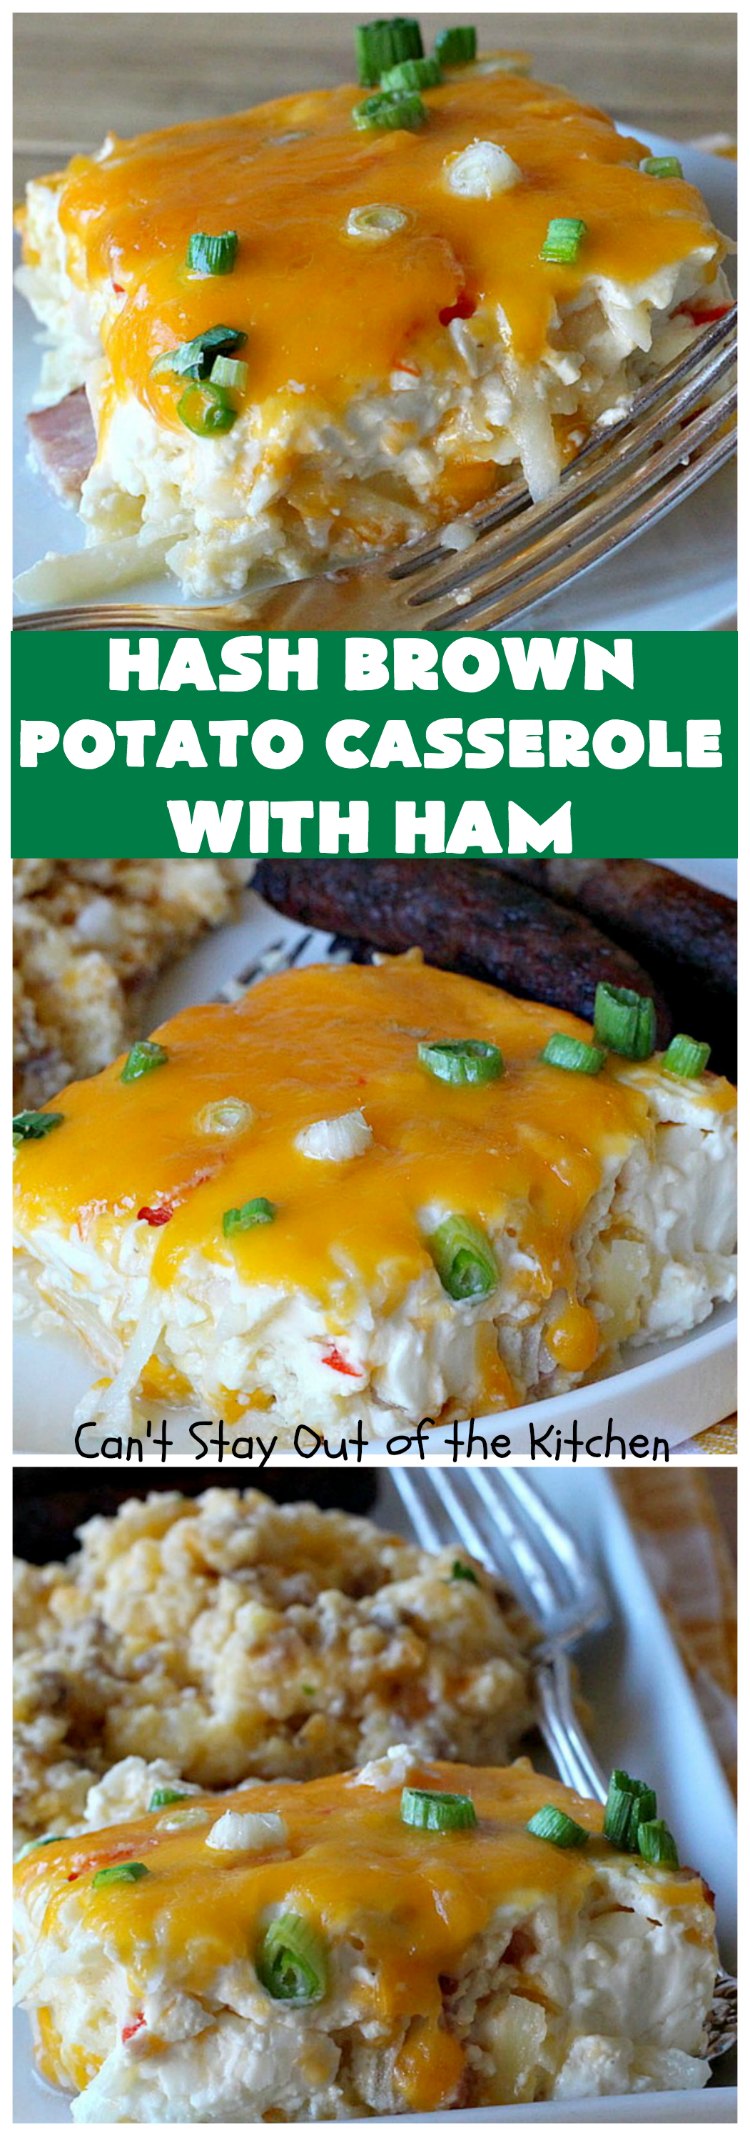 Hash Brown Potato Casserole with Ham | Can't Stay Out of the Kitchen